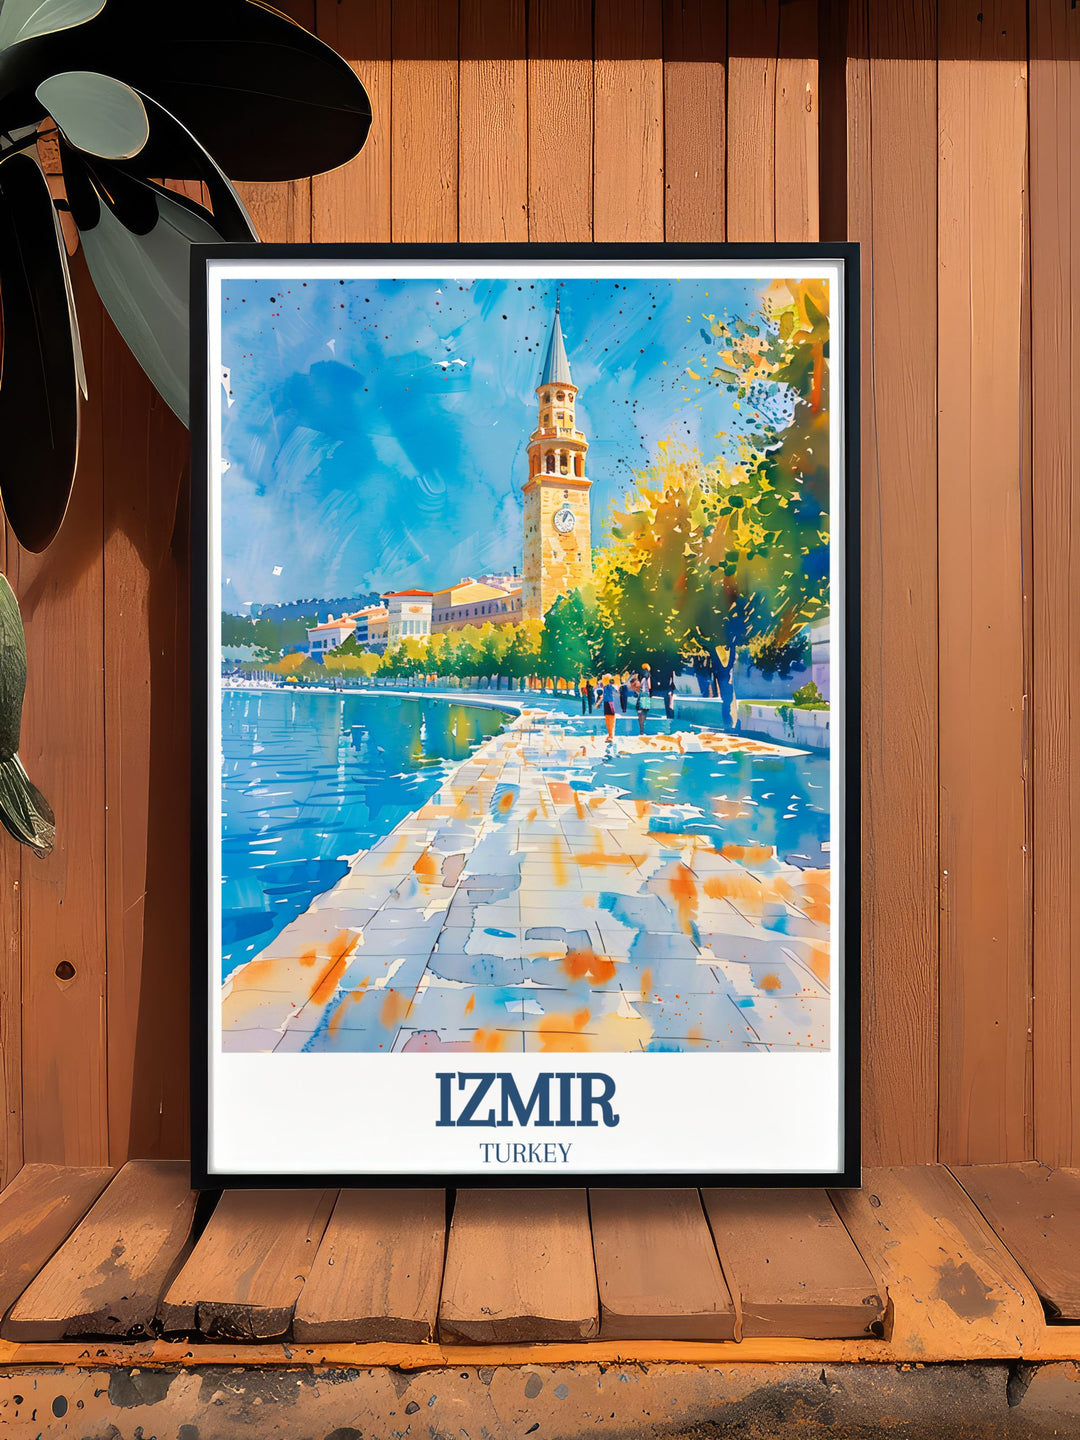 Highlighting the Clock Towers historical significance and the Kordon Promenades vibrant atmosphere, this travel poster is perfect for adding a touch of Izmirs heritage to your space.